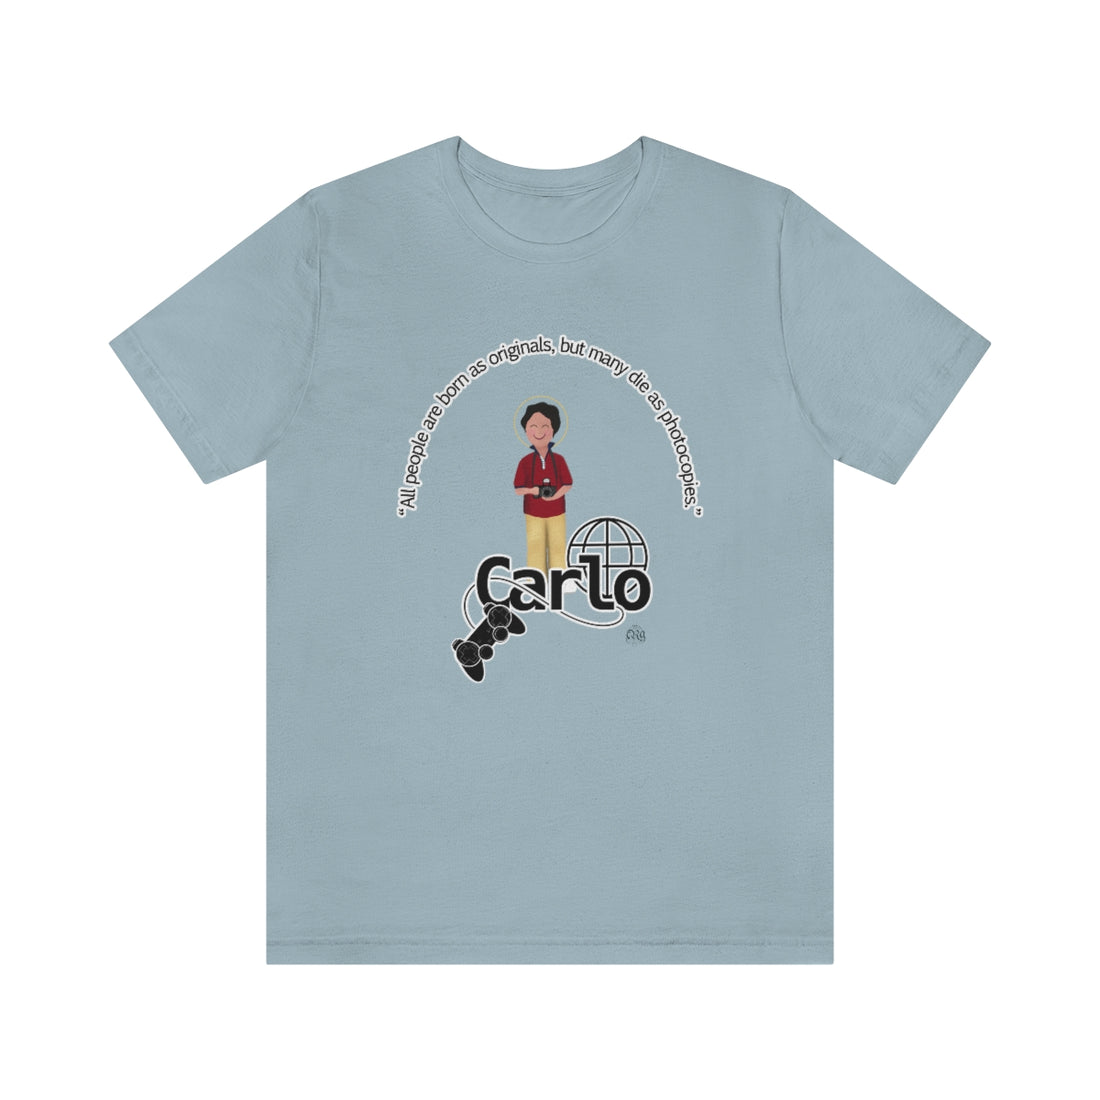 Blessed Carlo Acutis Adult T-Shirt